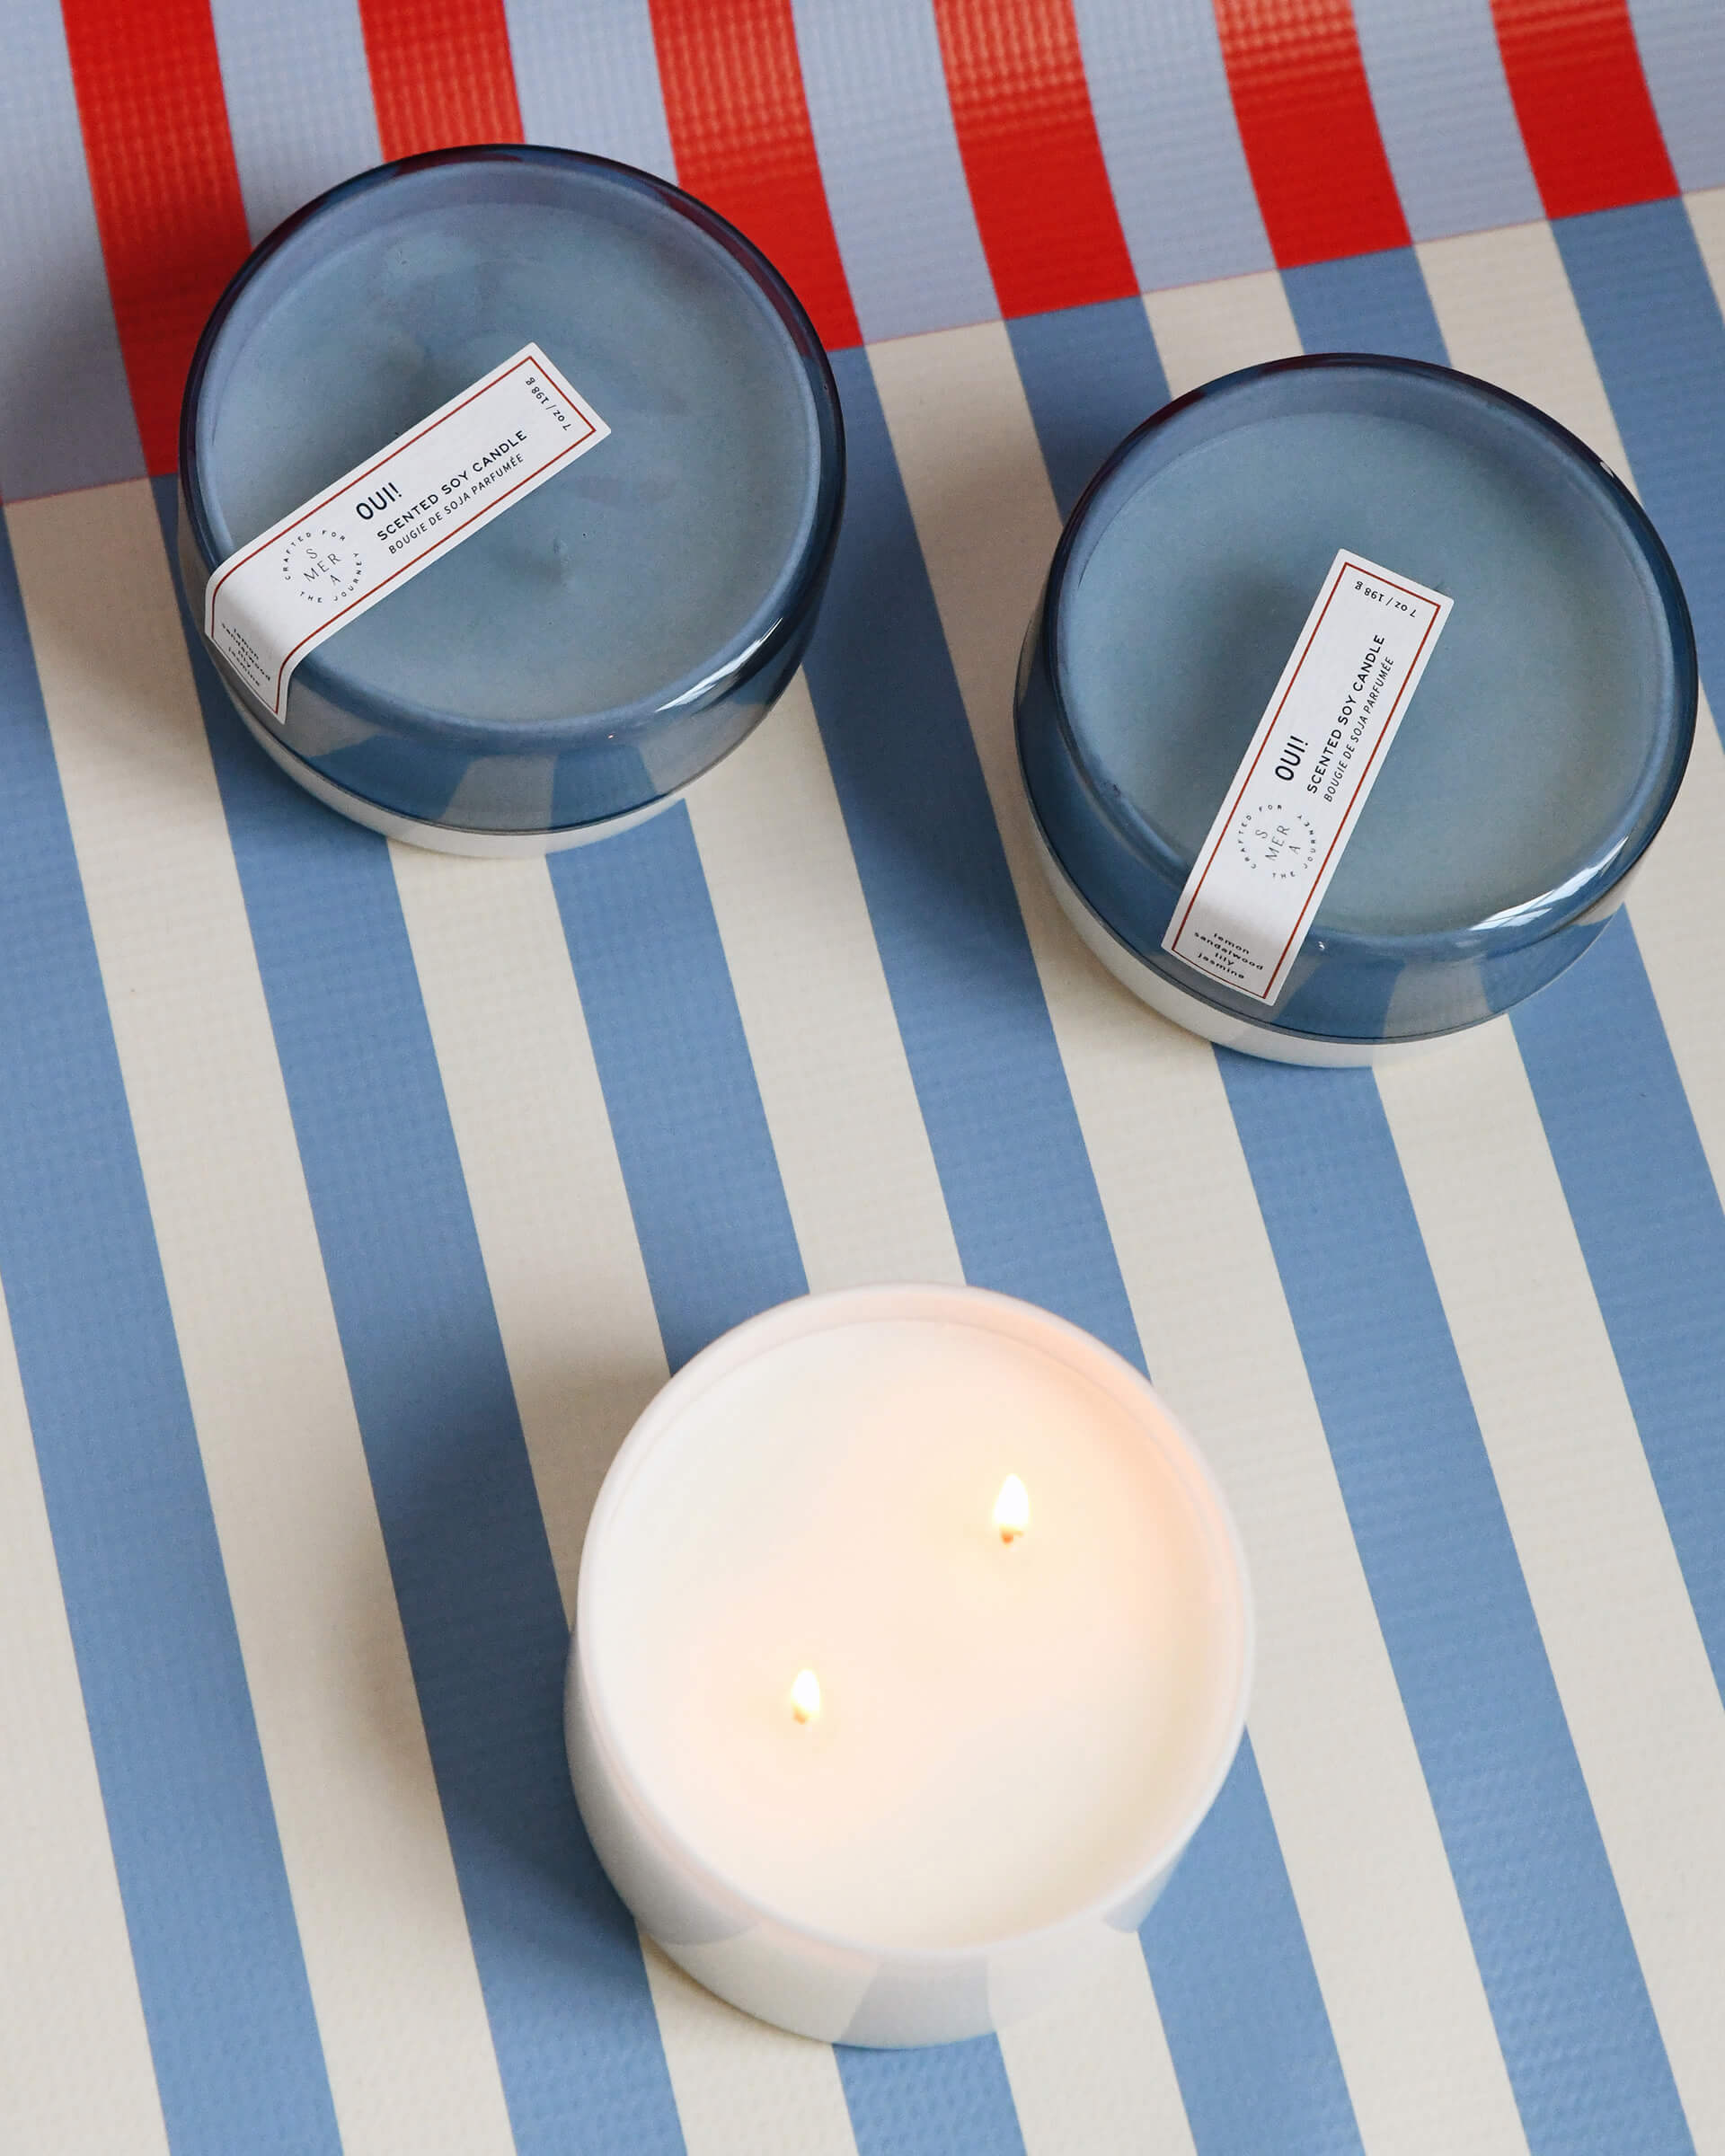 three 7 oz dark blue OUI! canister candles on a blue white and red striped background